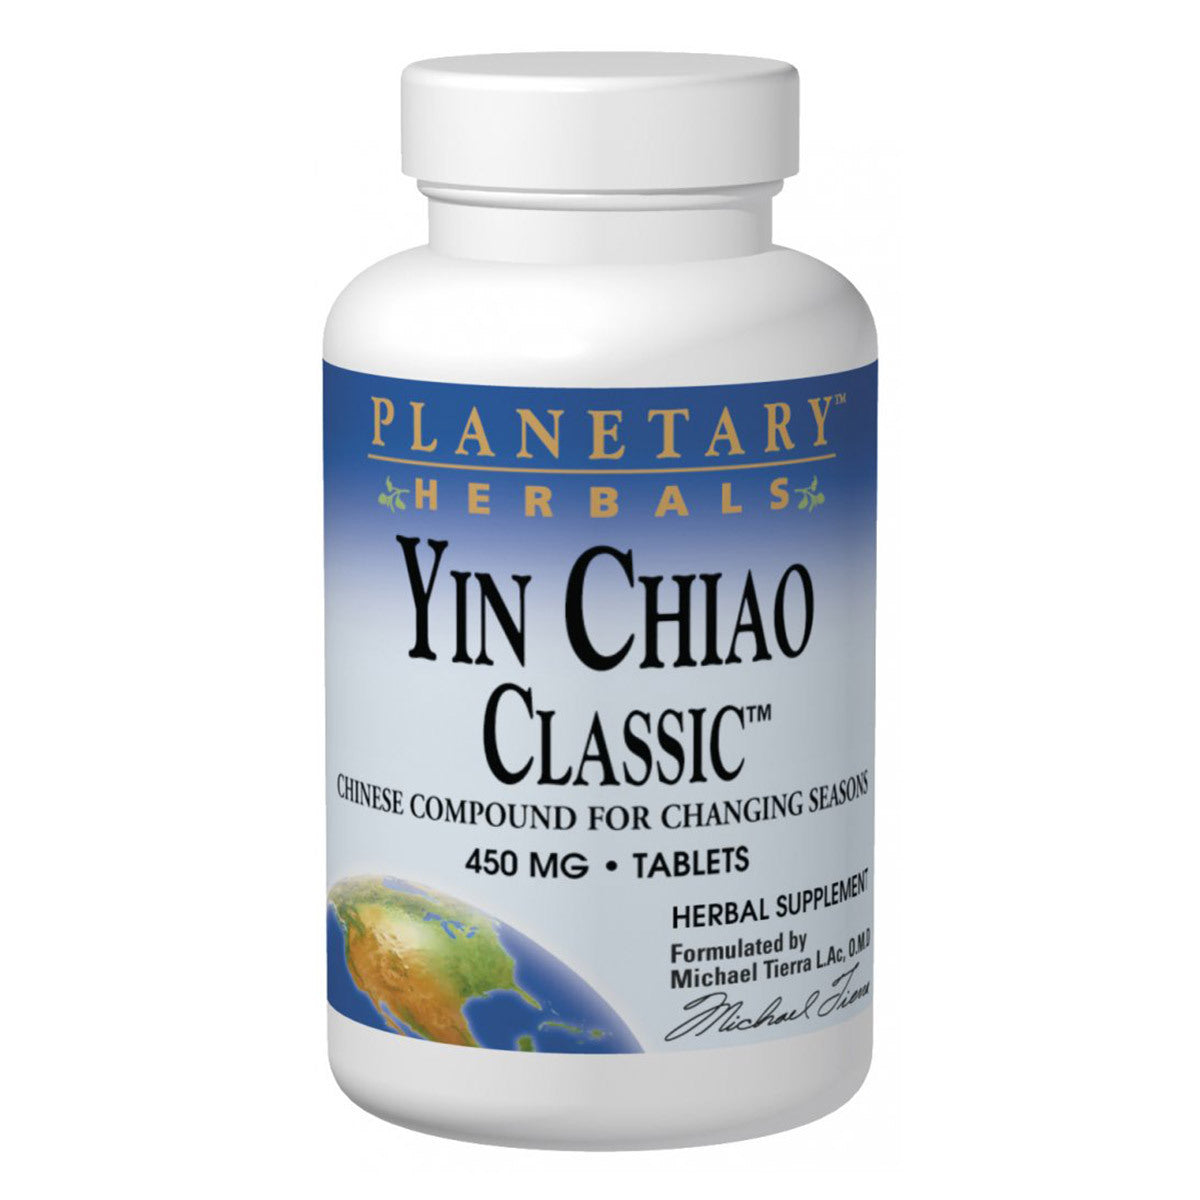 Primary image of Yin Chiao Classic 450mg